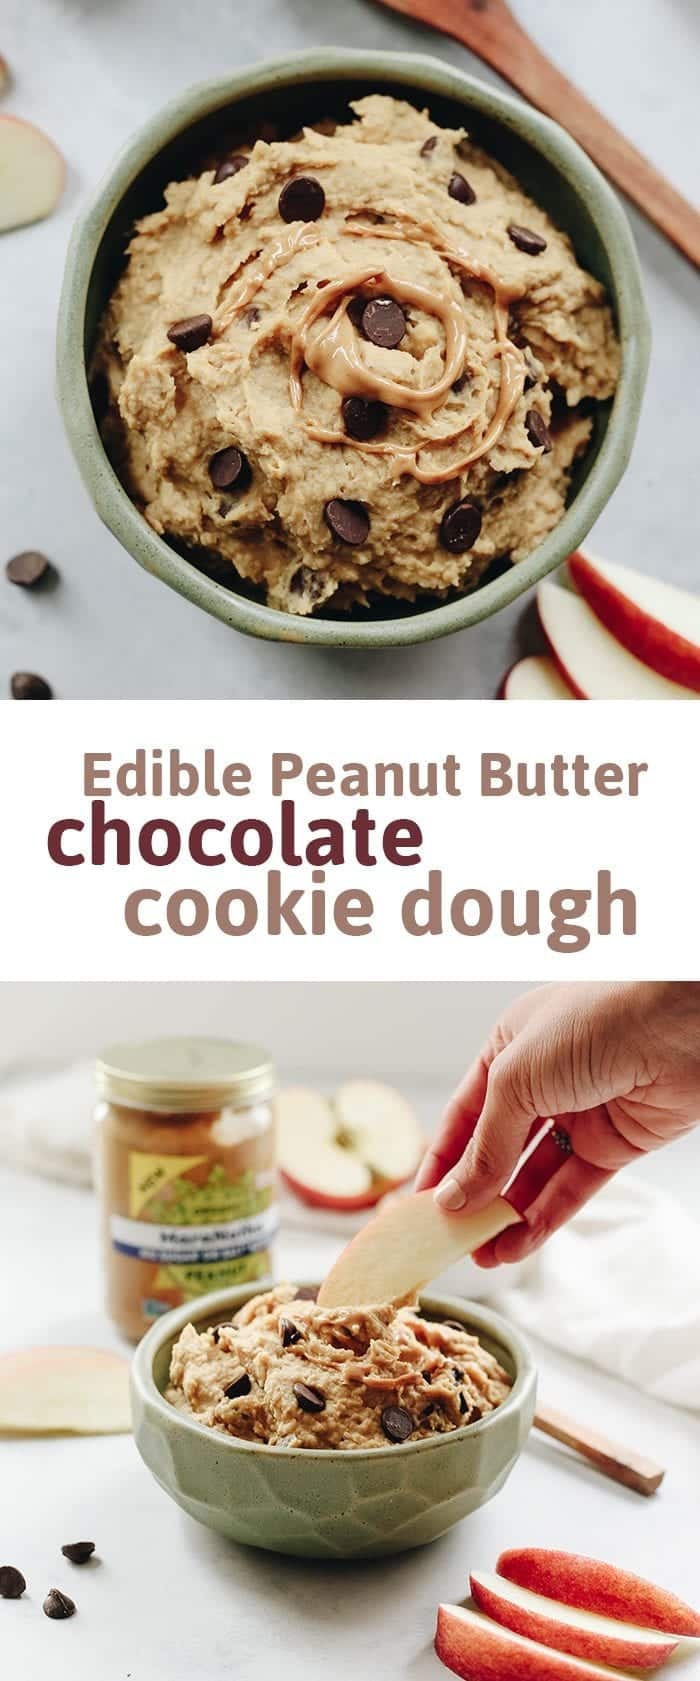 Have that craving for raw cookie dough, but want to keep things healthy? This Edible Peanut Butter Cookie Dough is raw, vegan, gluten-free and refined sugar-free but still tastes amazing. And it's ready in 5 minutes!